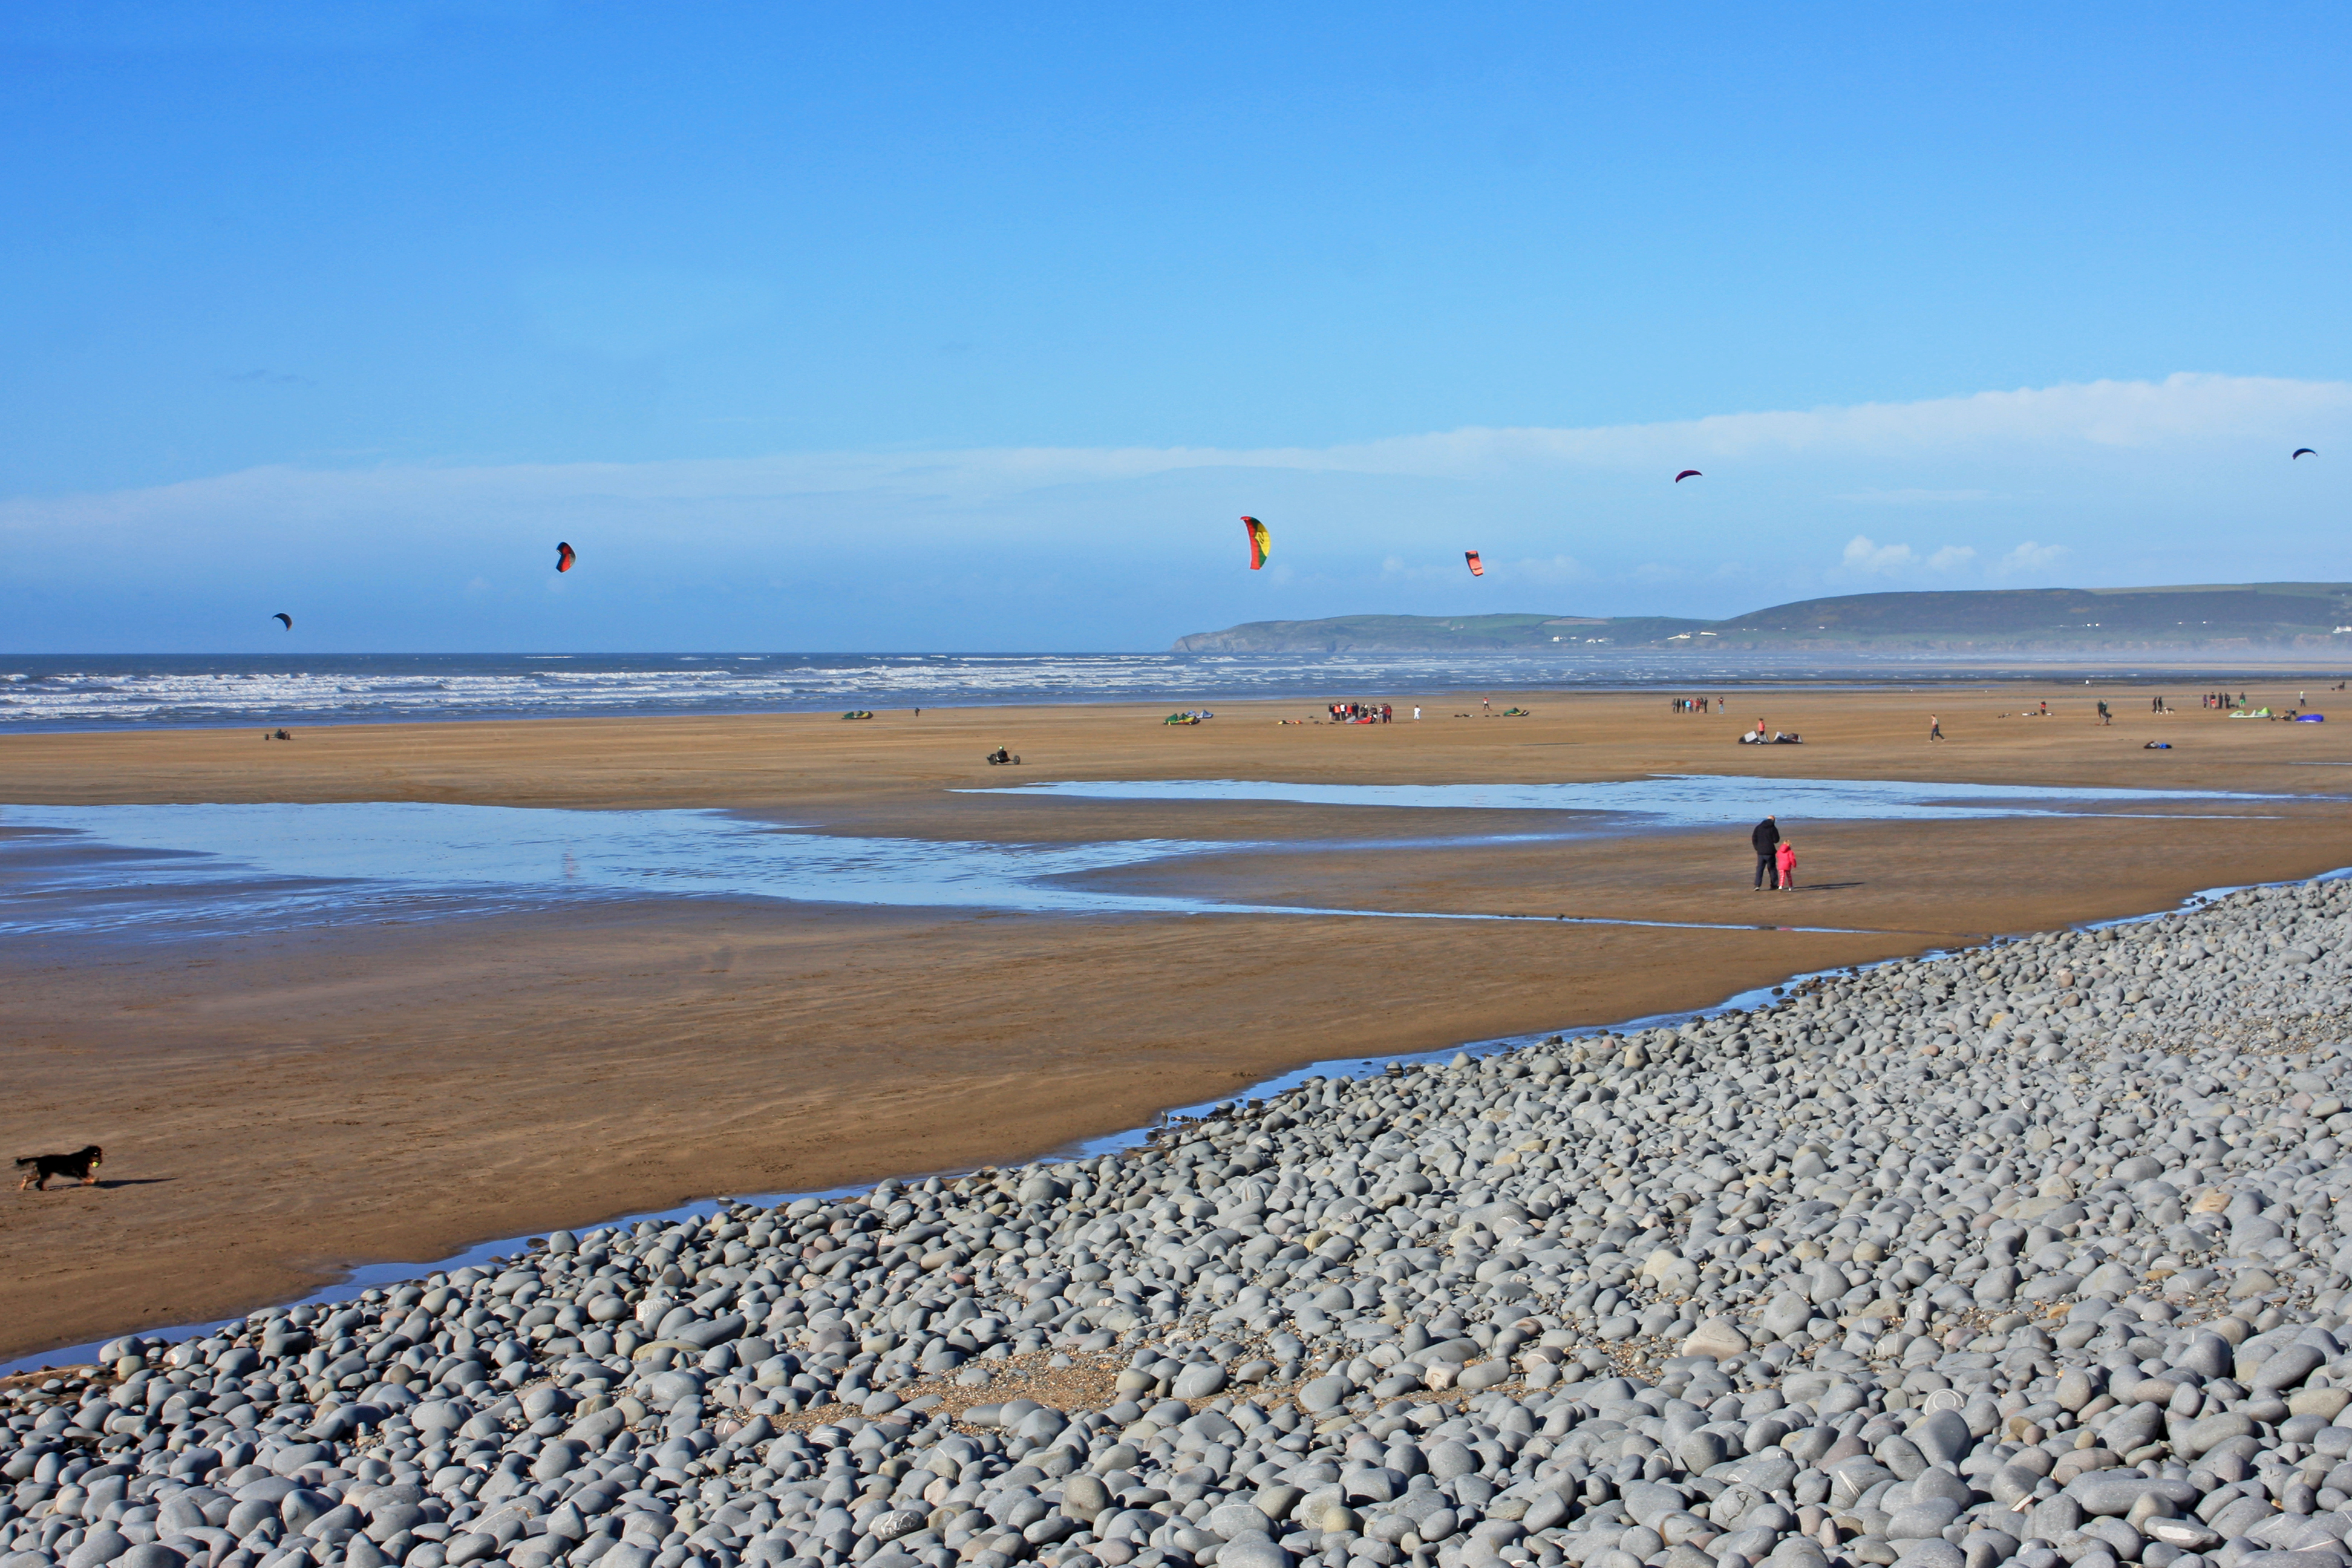 Landscape wide-angle of Westward Ho! beach with people and kitesurfers visible